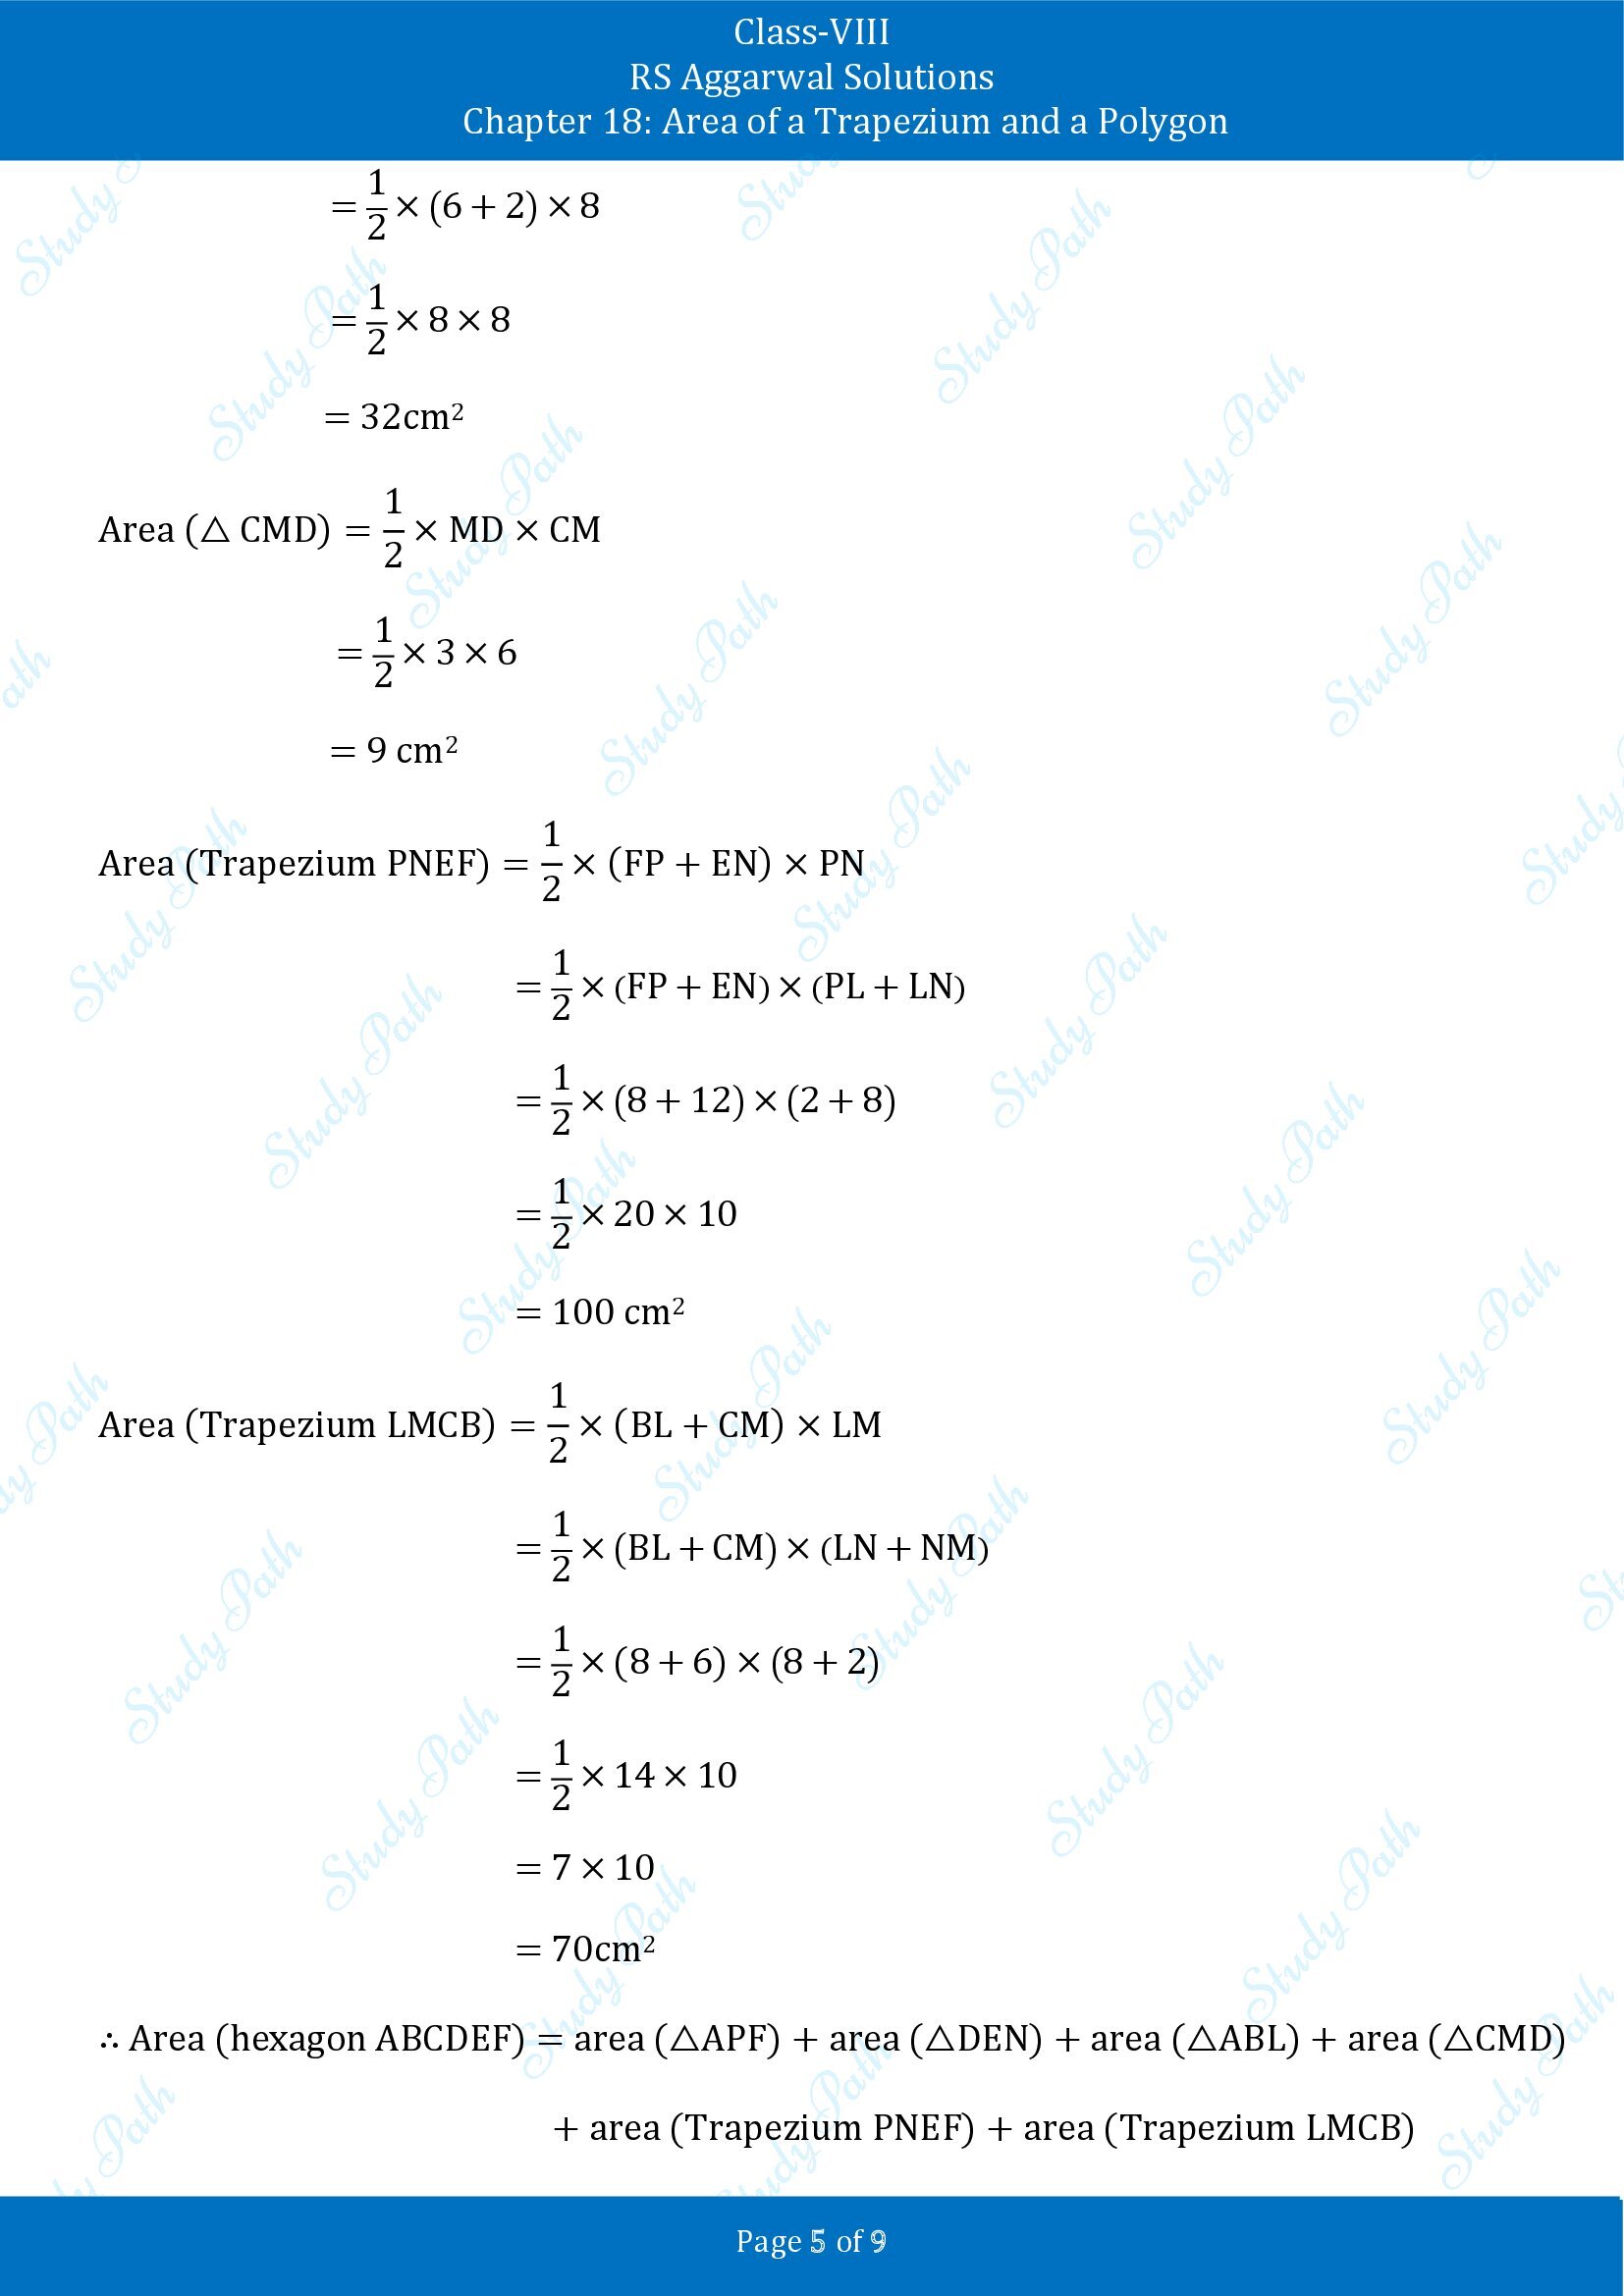 RS Aggarwal Solutions Class 8 Chapter 18 Area of a Trapezium and a Polygon Exercise 18B 00005